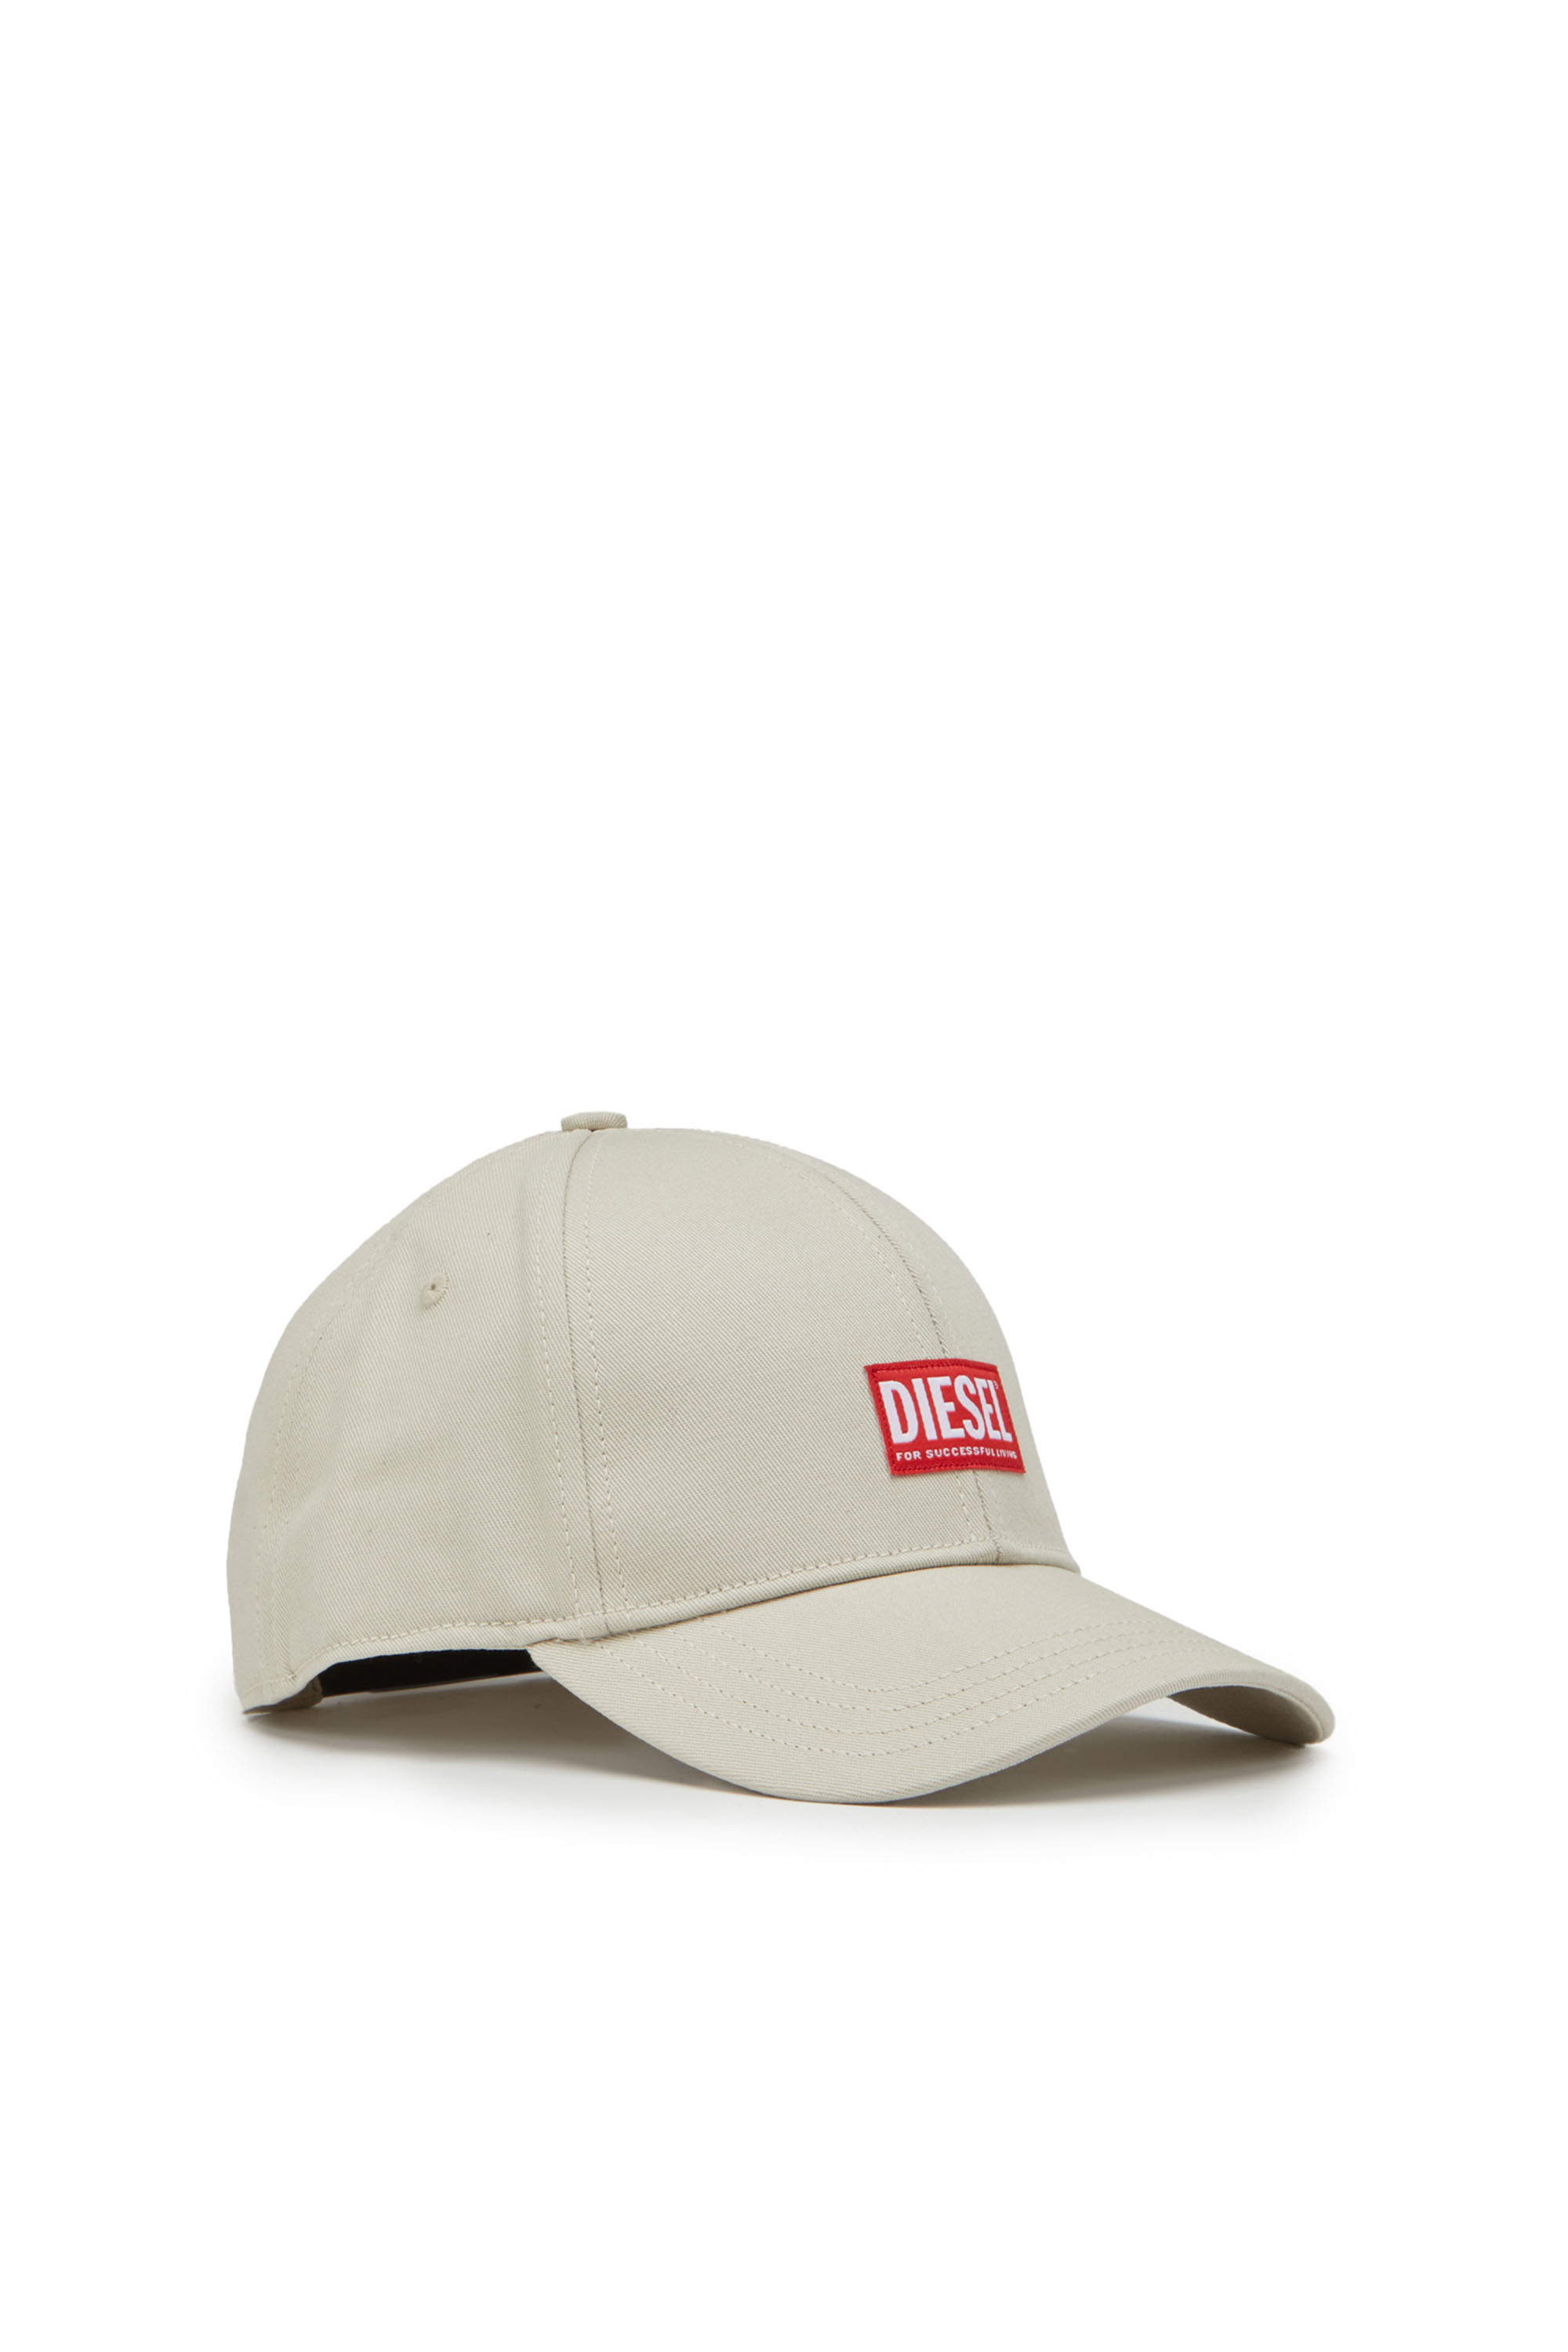 Diesel Baseball Cap With Logo Patch In Grey